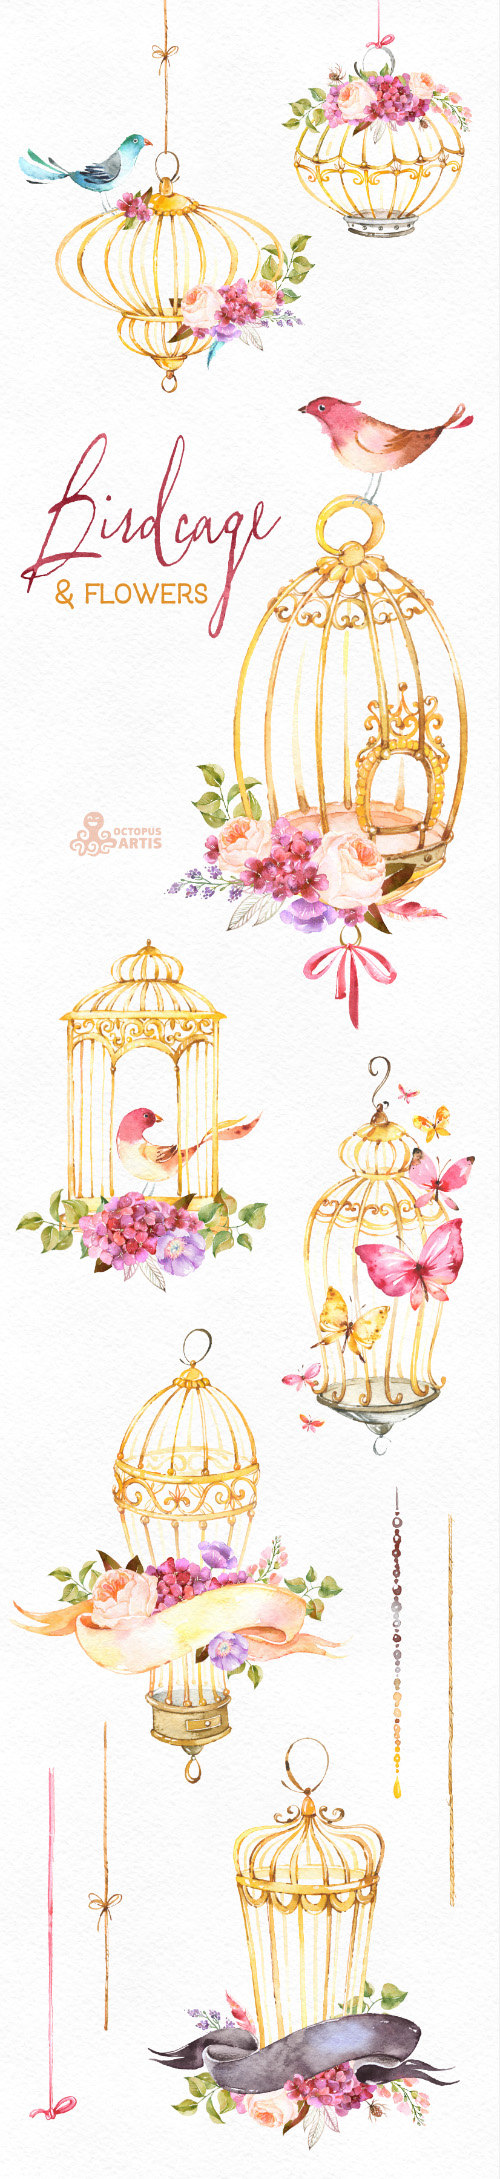 cage clipart gold bird